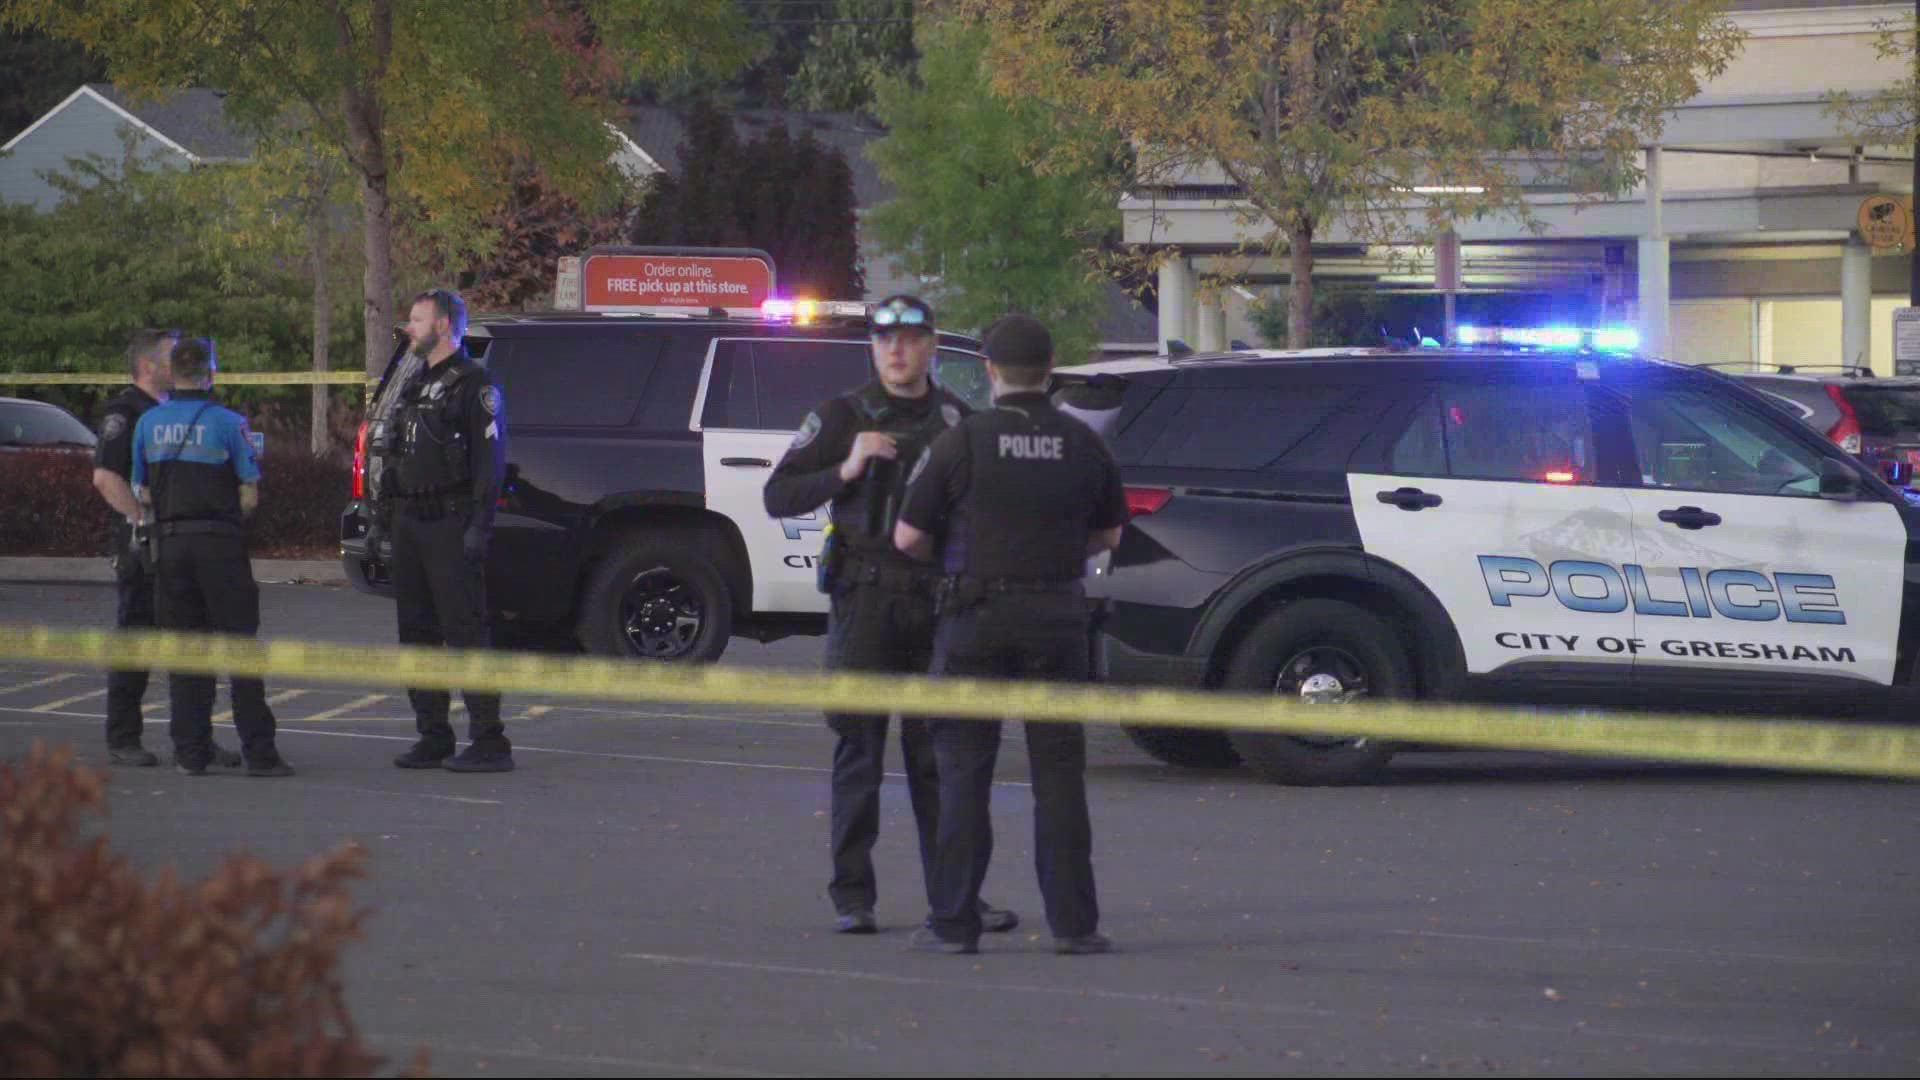 One person died Monday night after a shooting outside a Walmart store on W. Powell Blvd in Gresham.